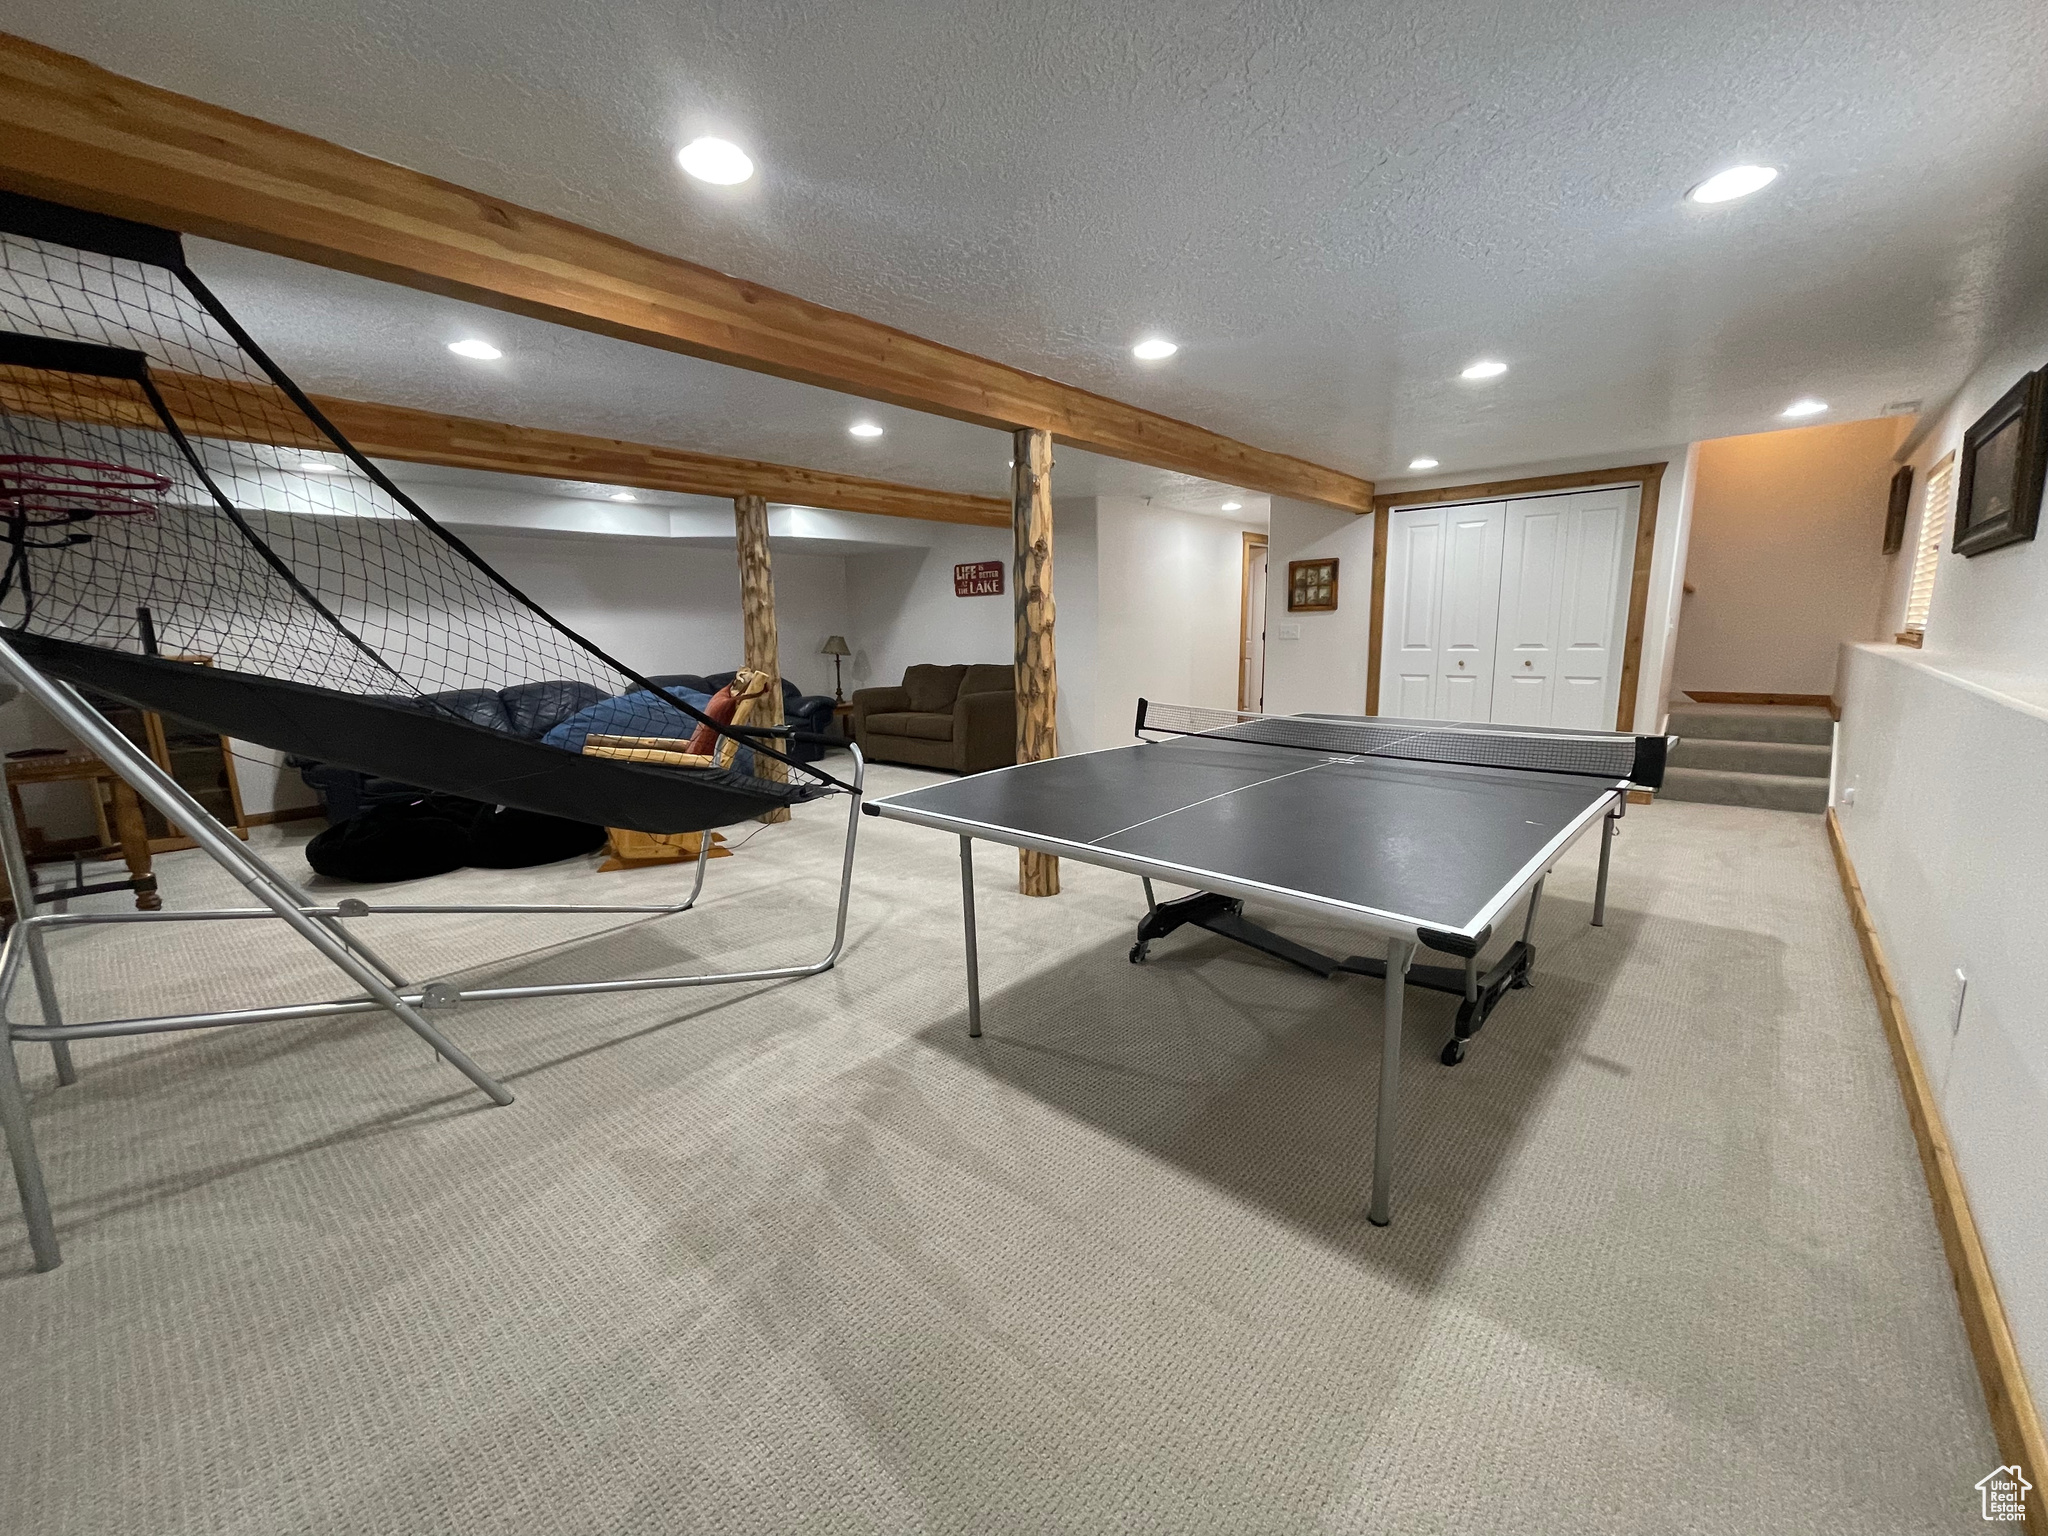 Game room featuring light colored carpet, a textured ceiling, and beam ceiling